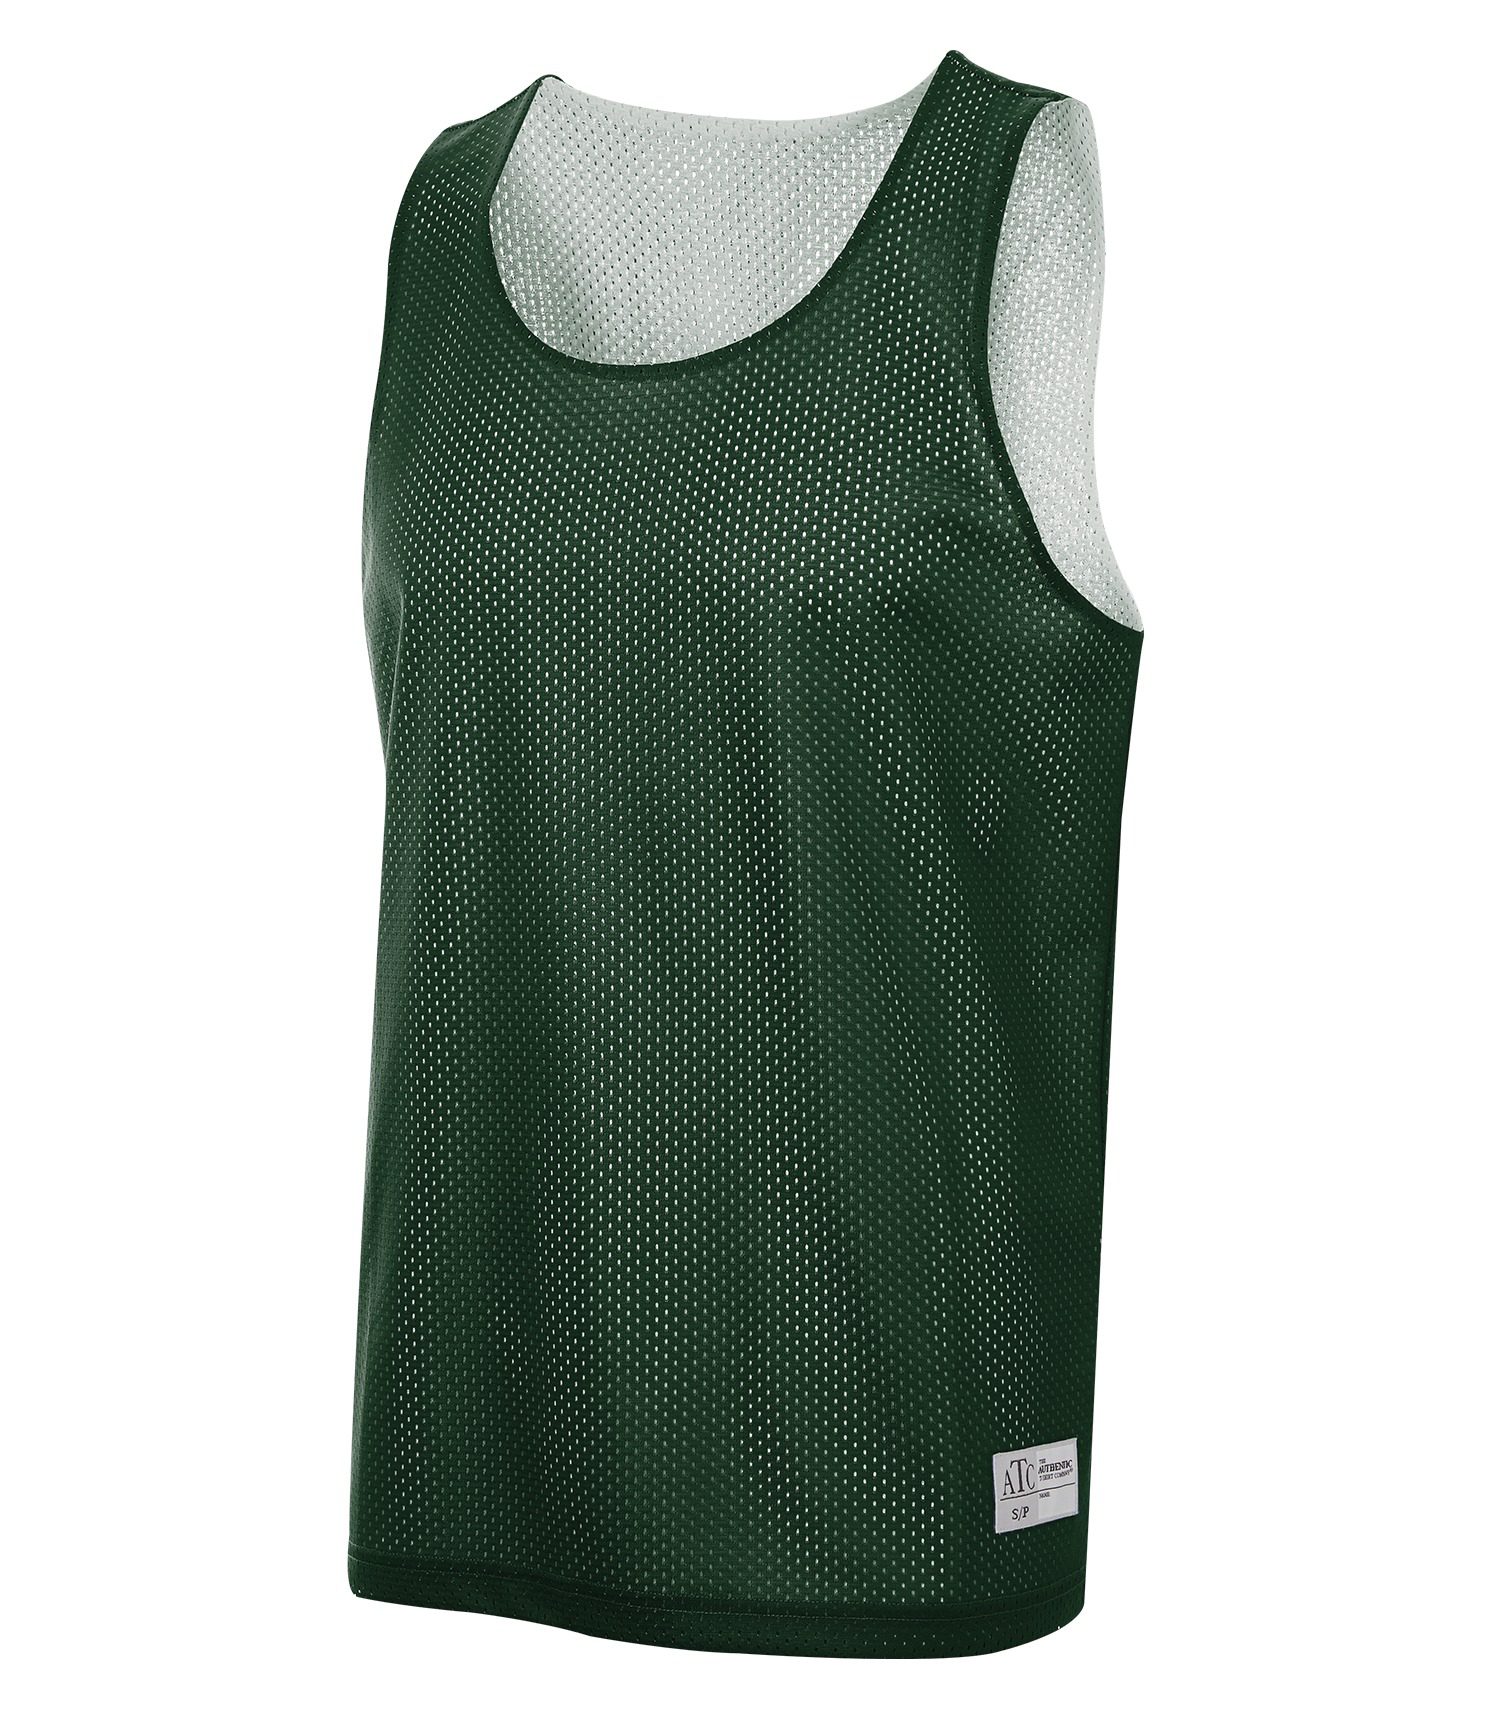 ATC™ PRO MESH REVERSIBLE TANK TOP #S3524 Forest Green / White